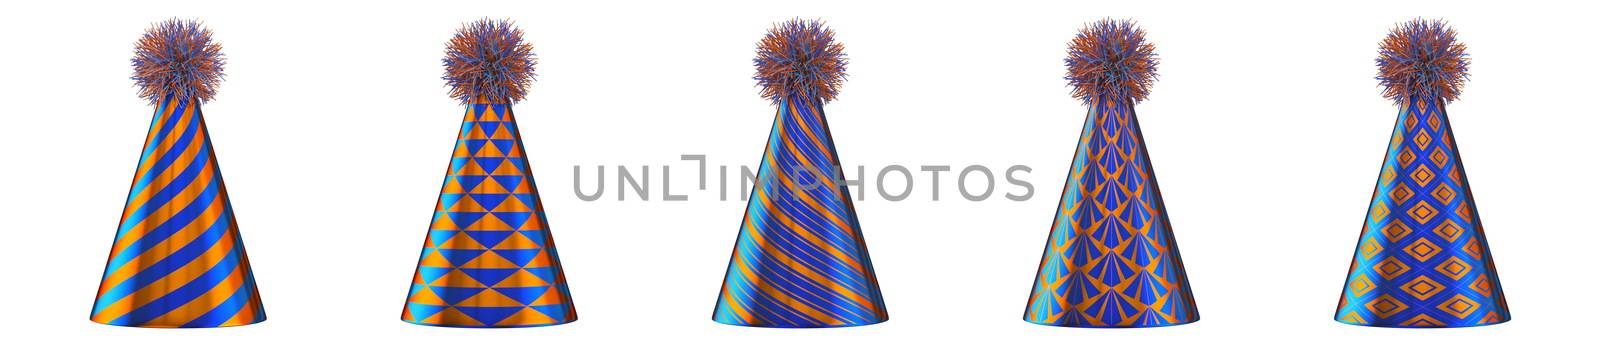 Five blue orange party hats 3D render illustration isolated on white background